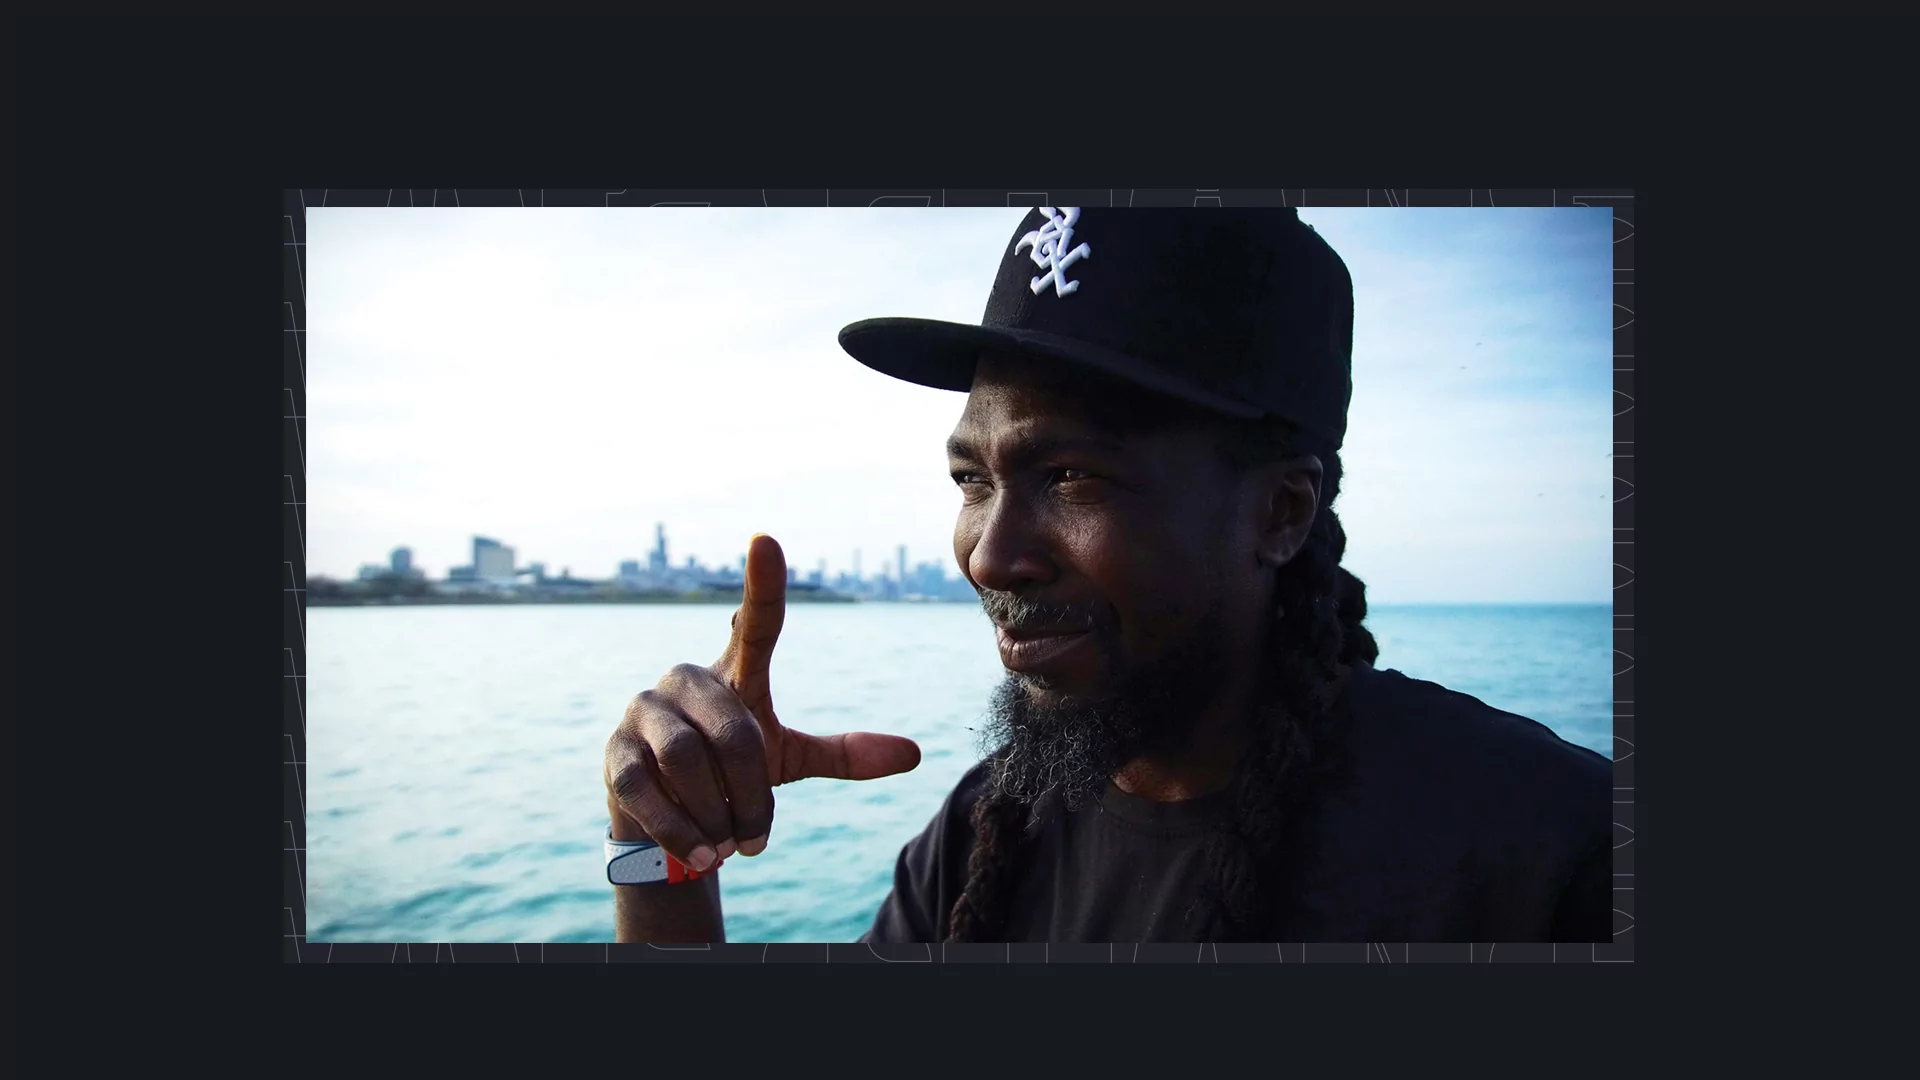 Photo of RP Boo wearing a black hat out on the water.